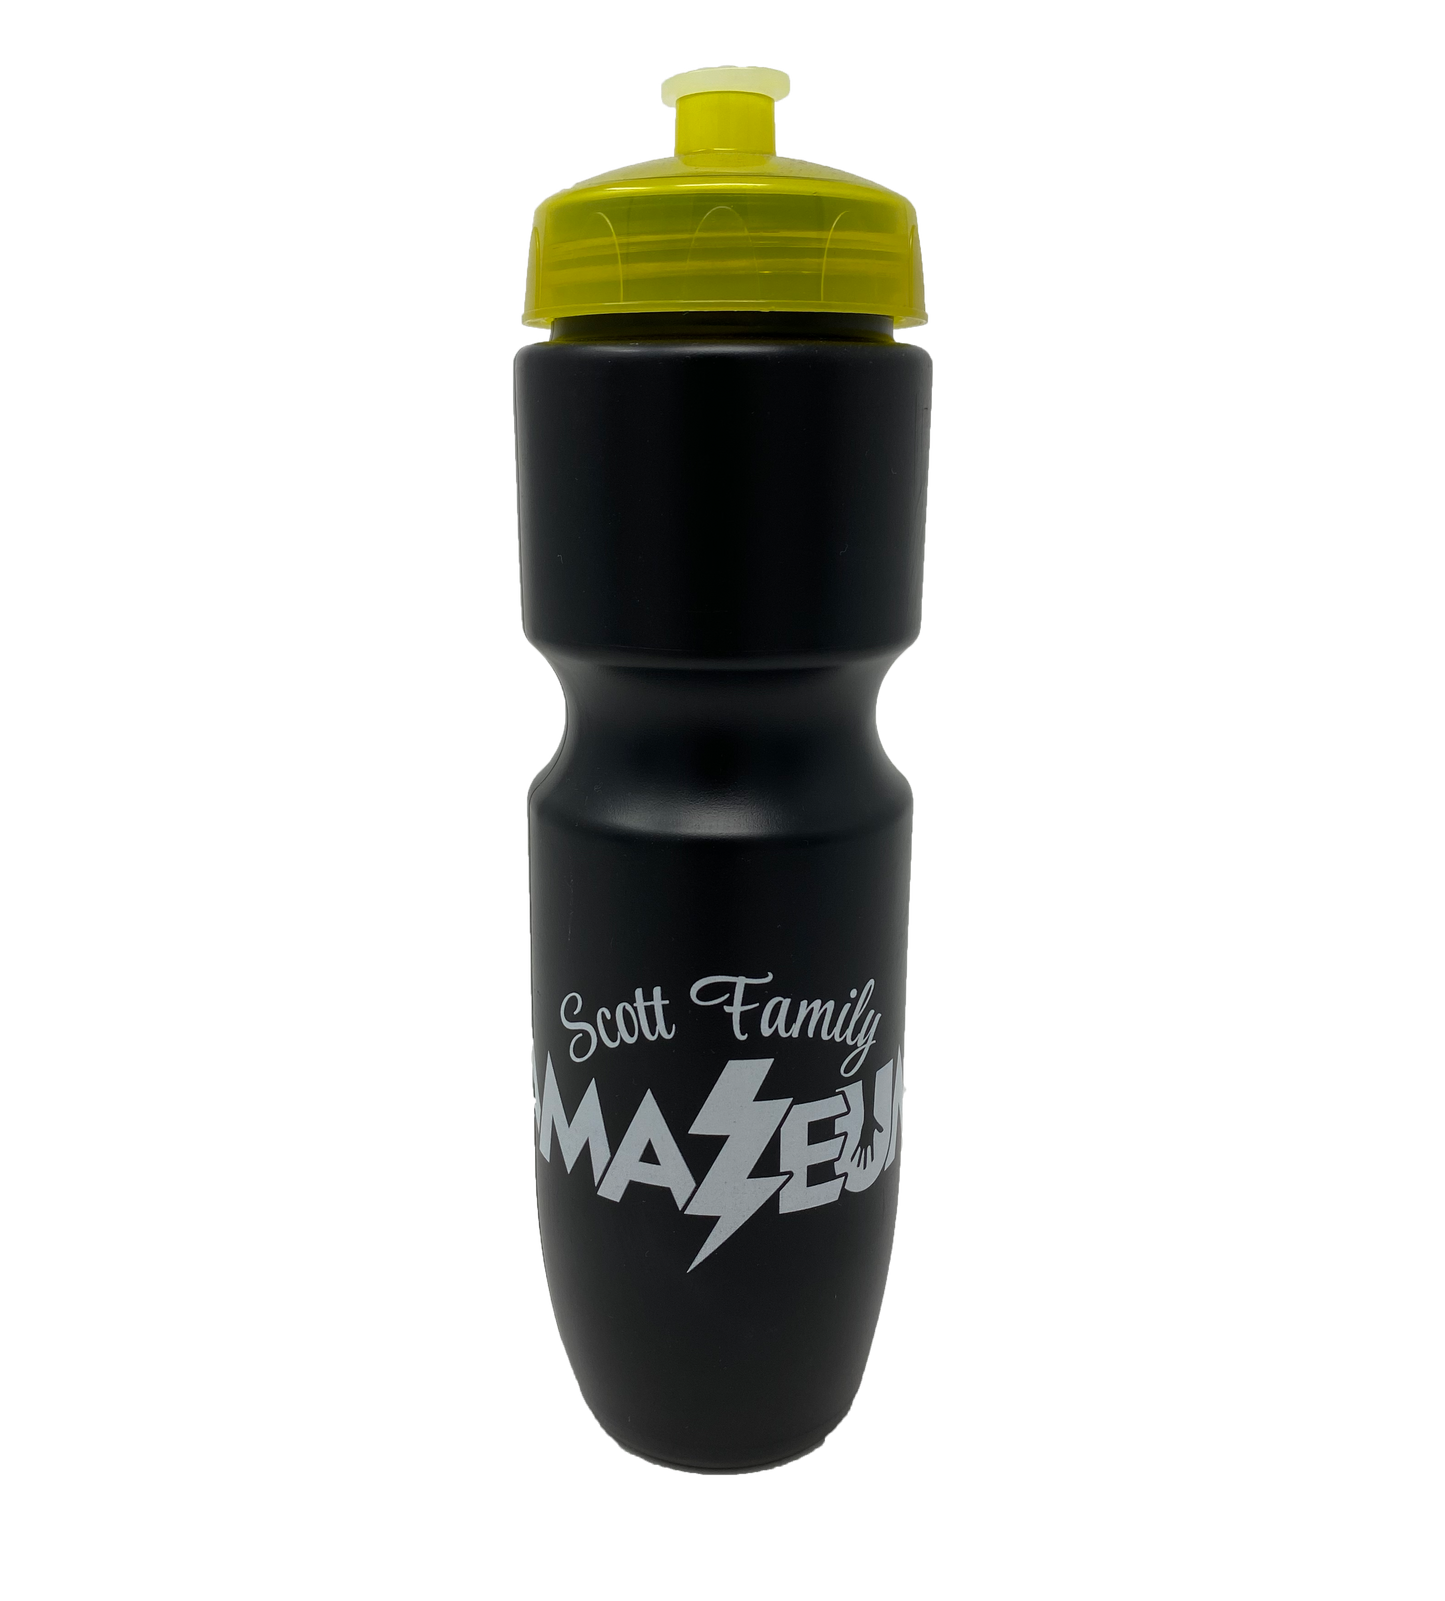 A black squeezy water bottle with highlighter yellow lid. Has Scott Family Amazeum printed in light grey on front. 